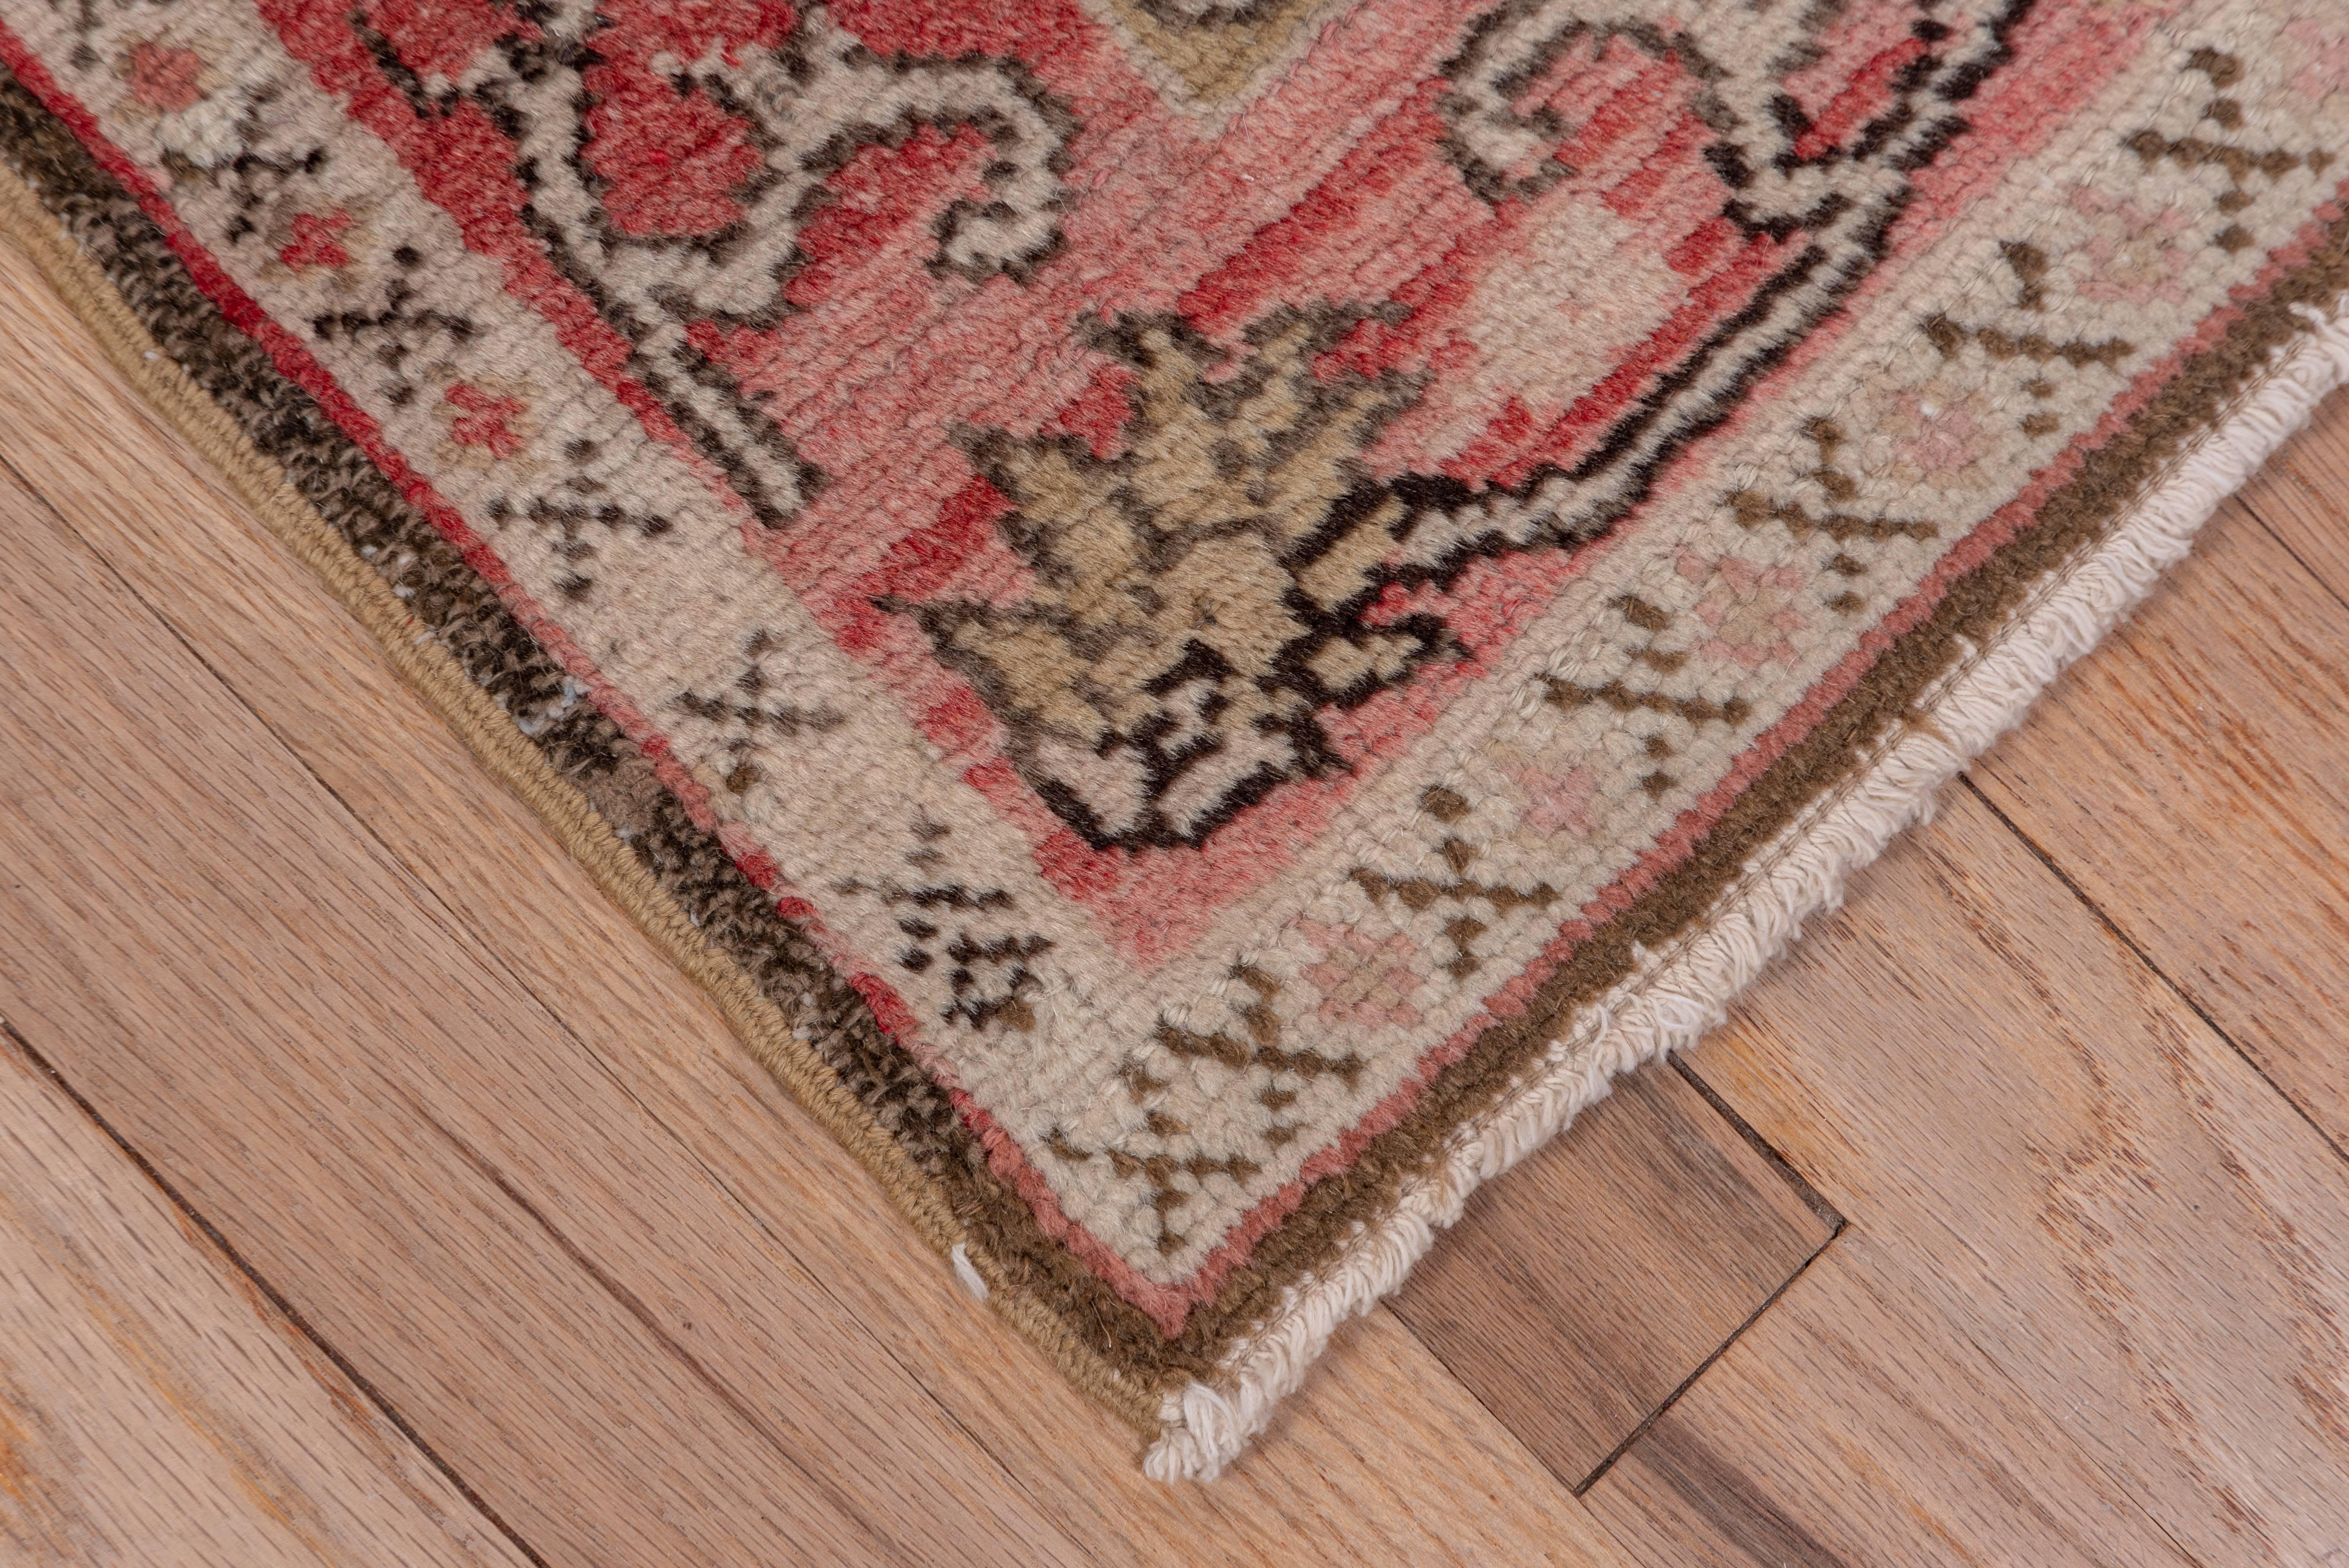 This western Anatolian workshop runner has a Caucasian Shirvan design of five stepped hexagonal disjoint medallions detailed in ivory, beige, red and dark brown on a sandy field, set within a red border with a scrolling tendril ornament. The rug